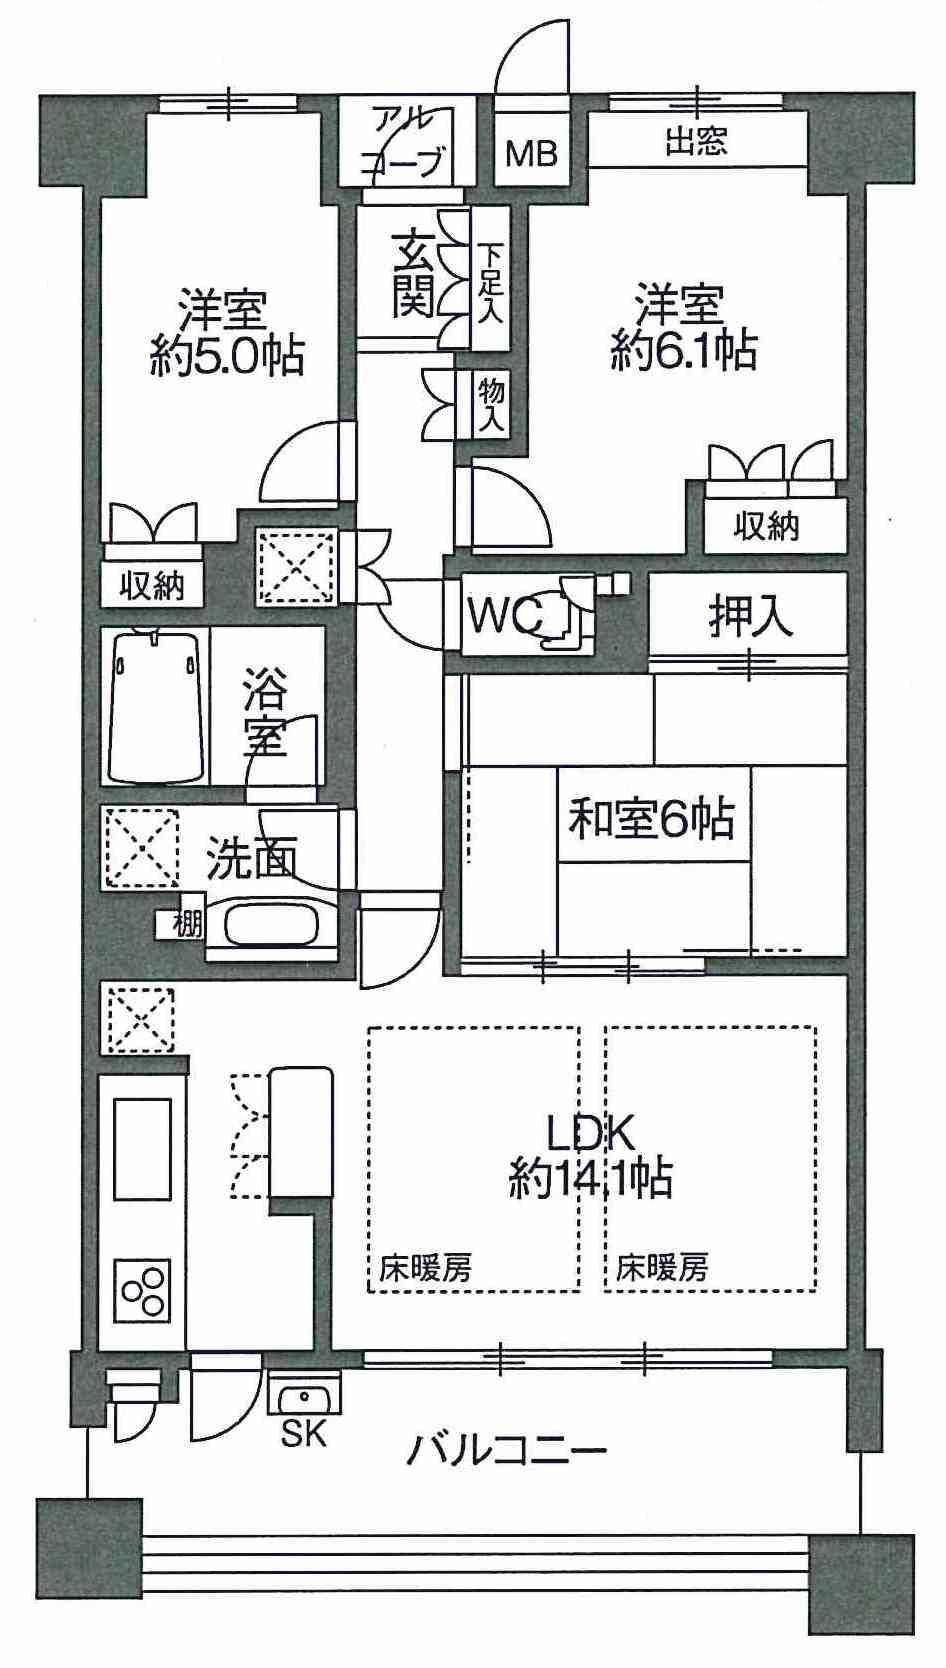 Floor plan. 3LDK, Price 29,800,000 yen, Occupied area 71.05 sq m , Balcony area 12.56 sq m living dining yang per good at Haisasshi south-facing 2200mm!